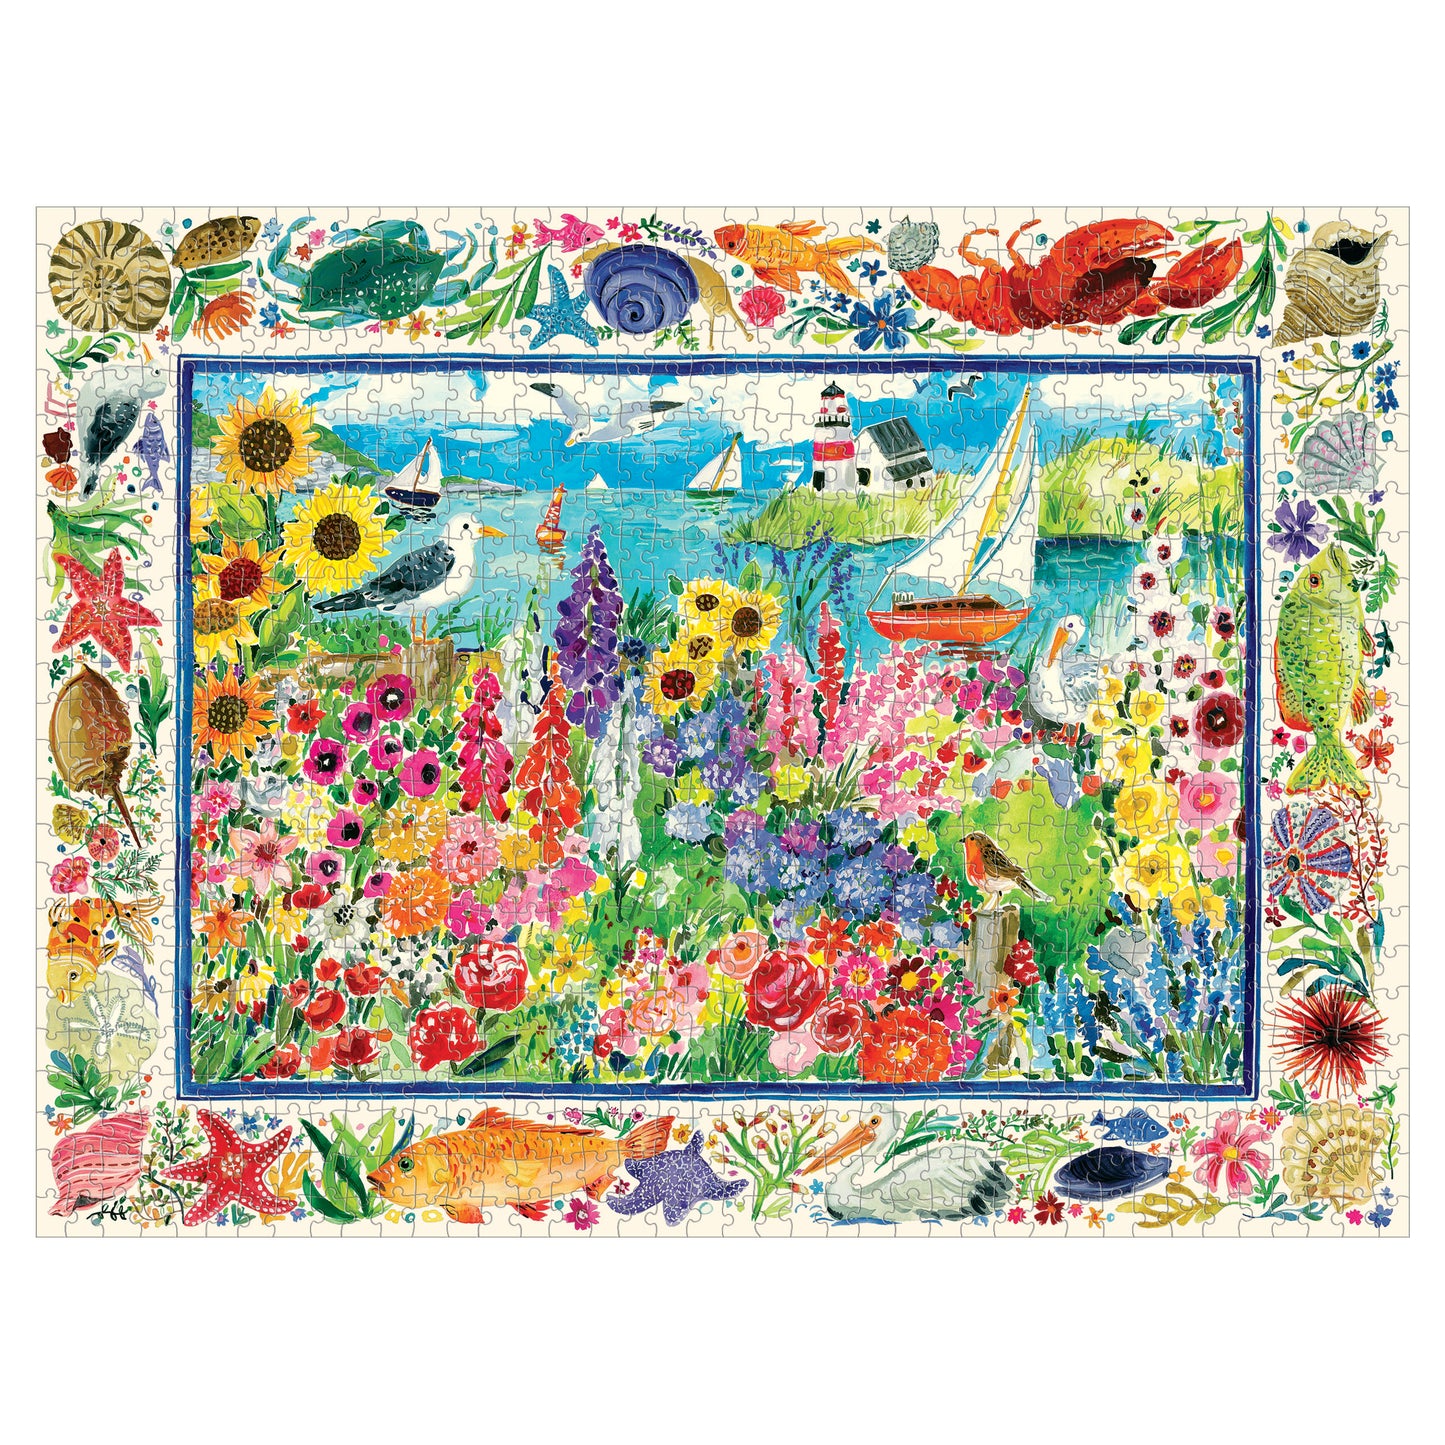 Seagull Garden in Maine 1000 Piece Rectangle Puzzle eeBoo Piece & Love Gifts for Beach Nature Lovers